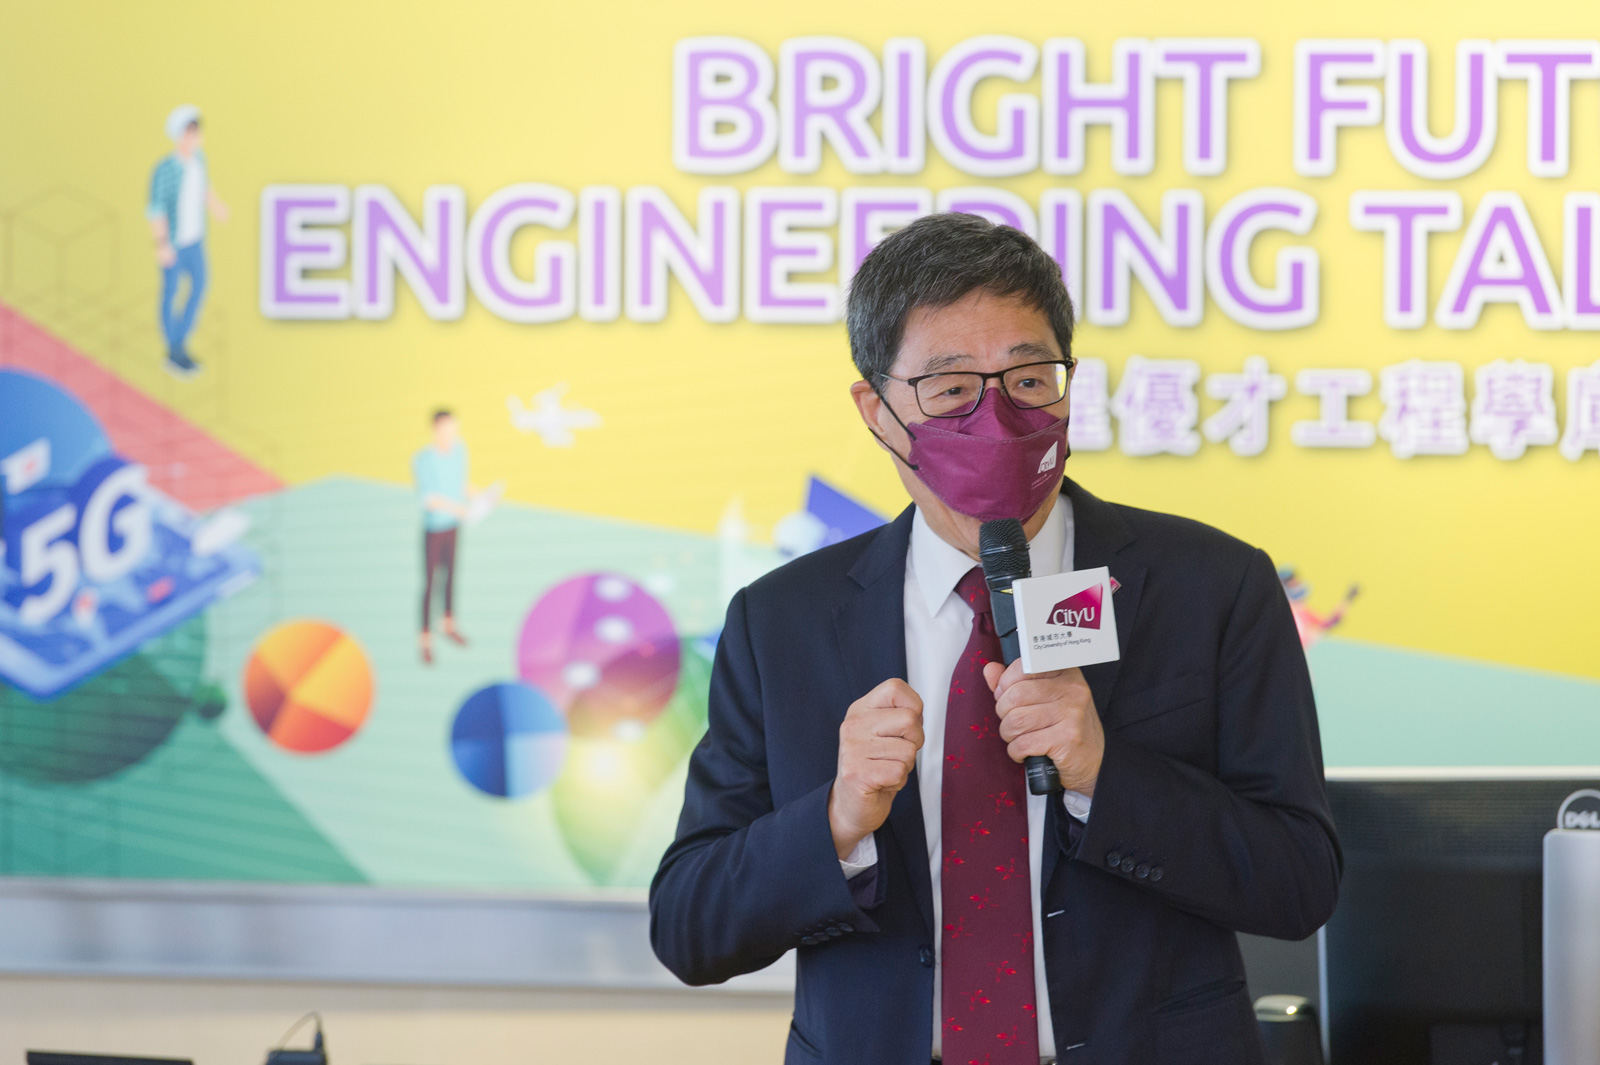 President Kuo said the Bright Future Engineering Talent Hub will allows CityU’s engineering students to promote STEM education among secondary and primary students.